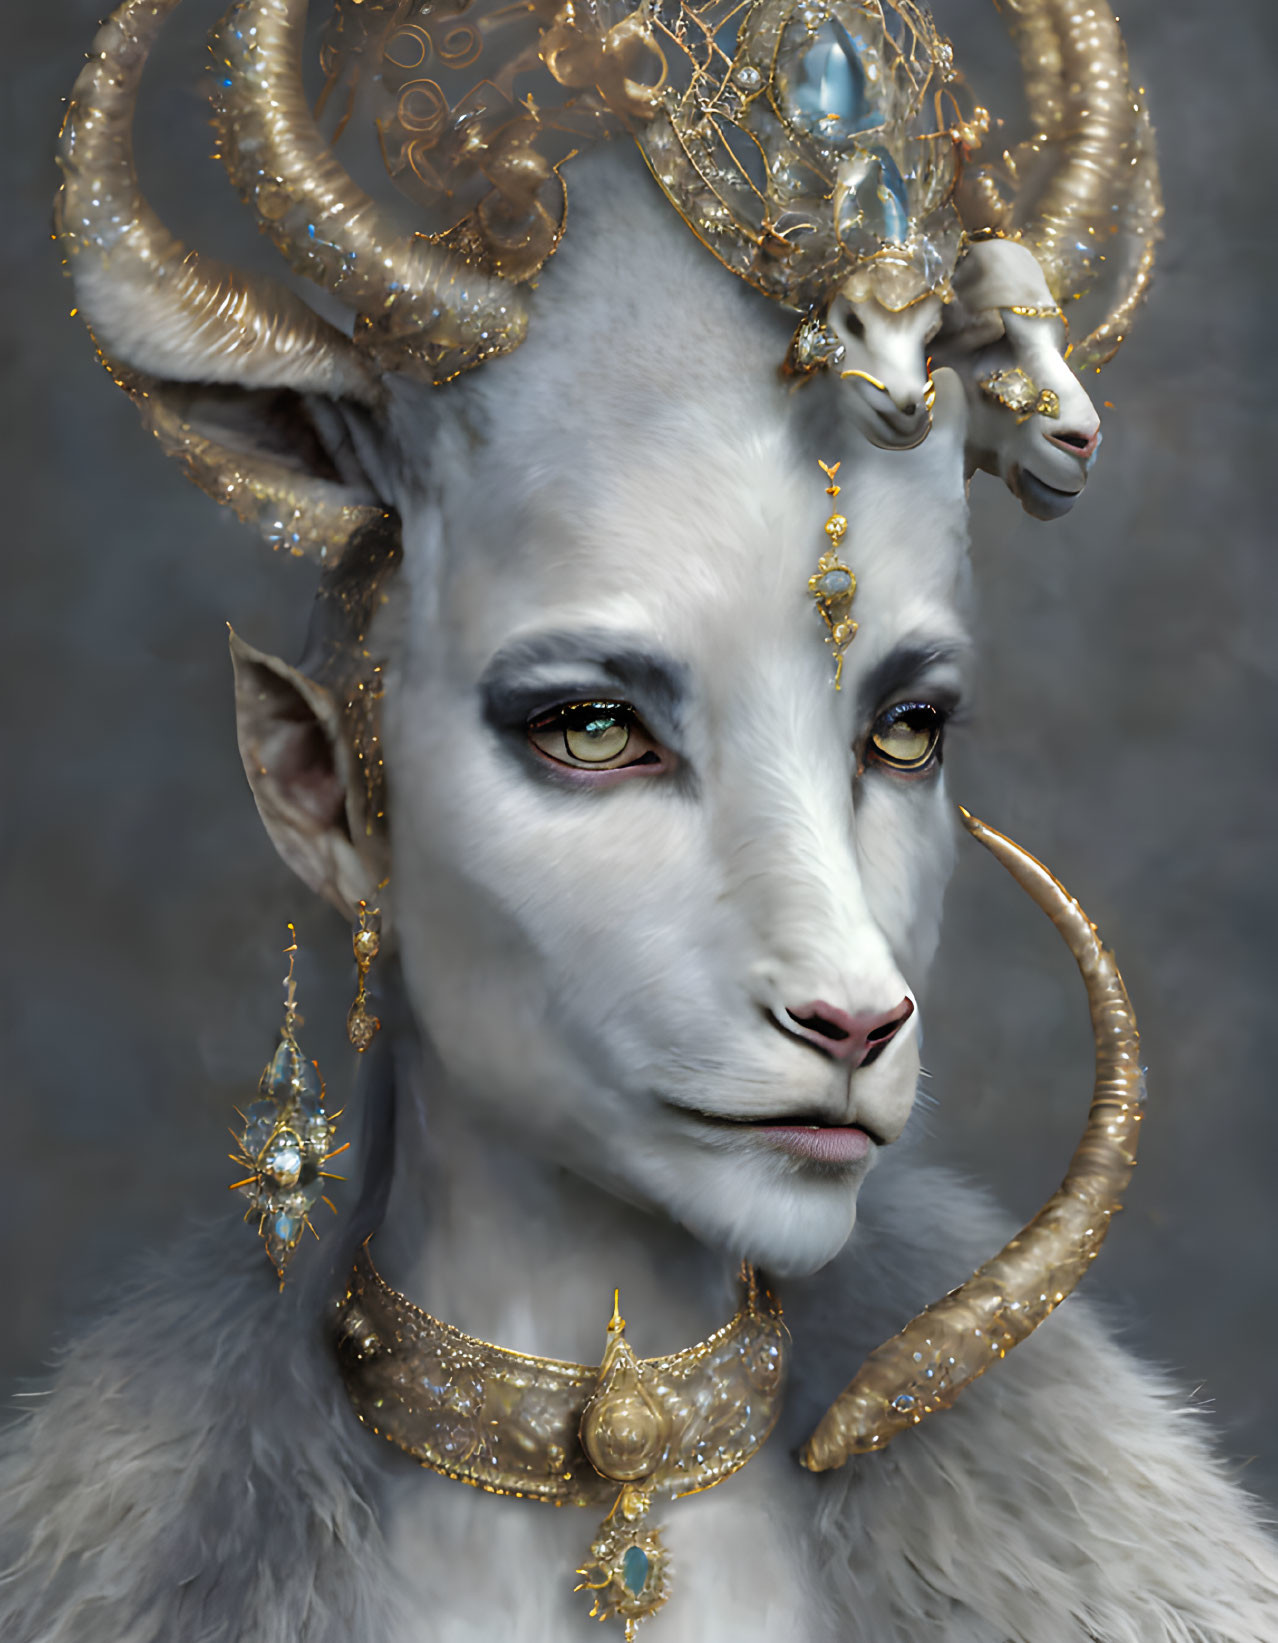 Fantasy creature with ram-like horns and golden jewelry.